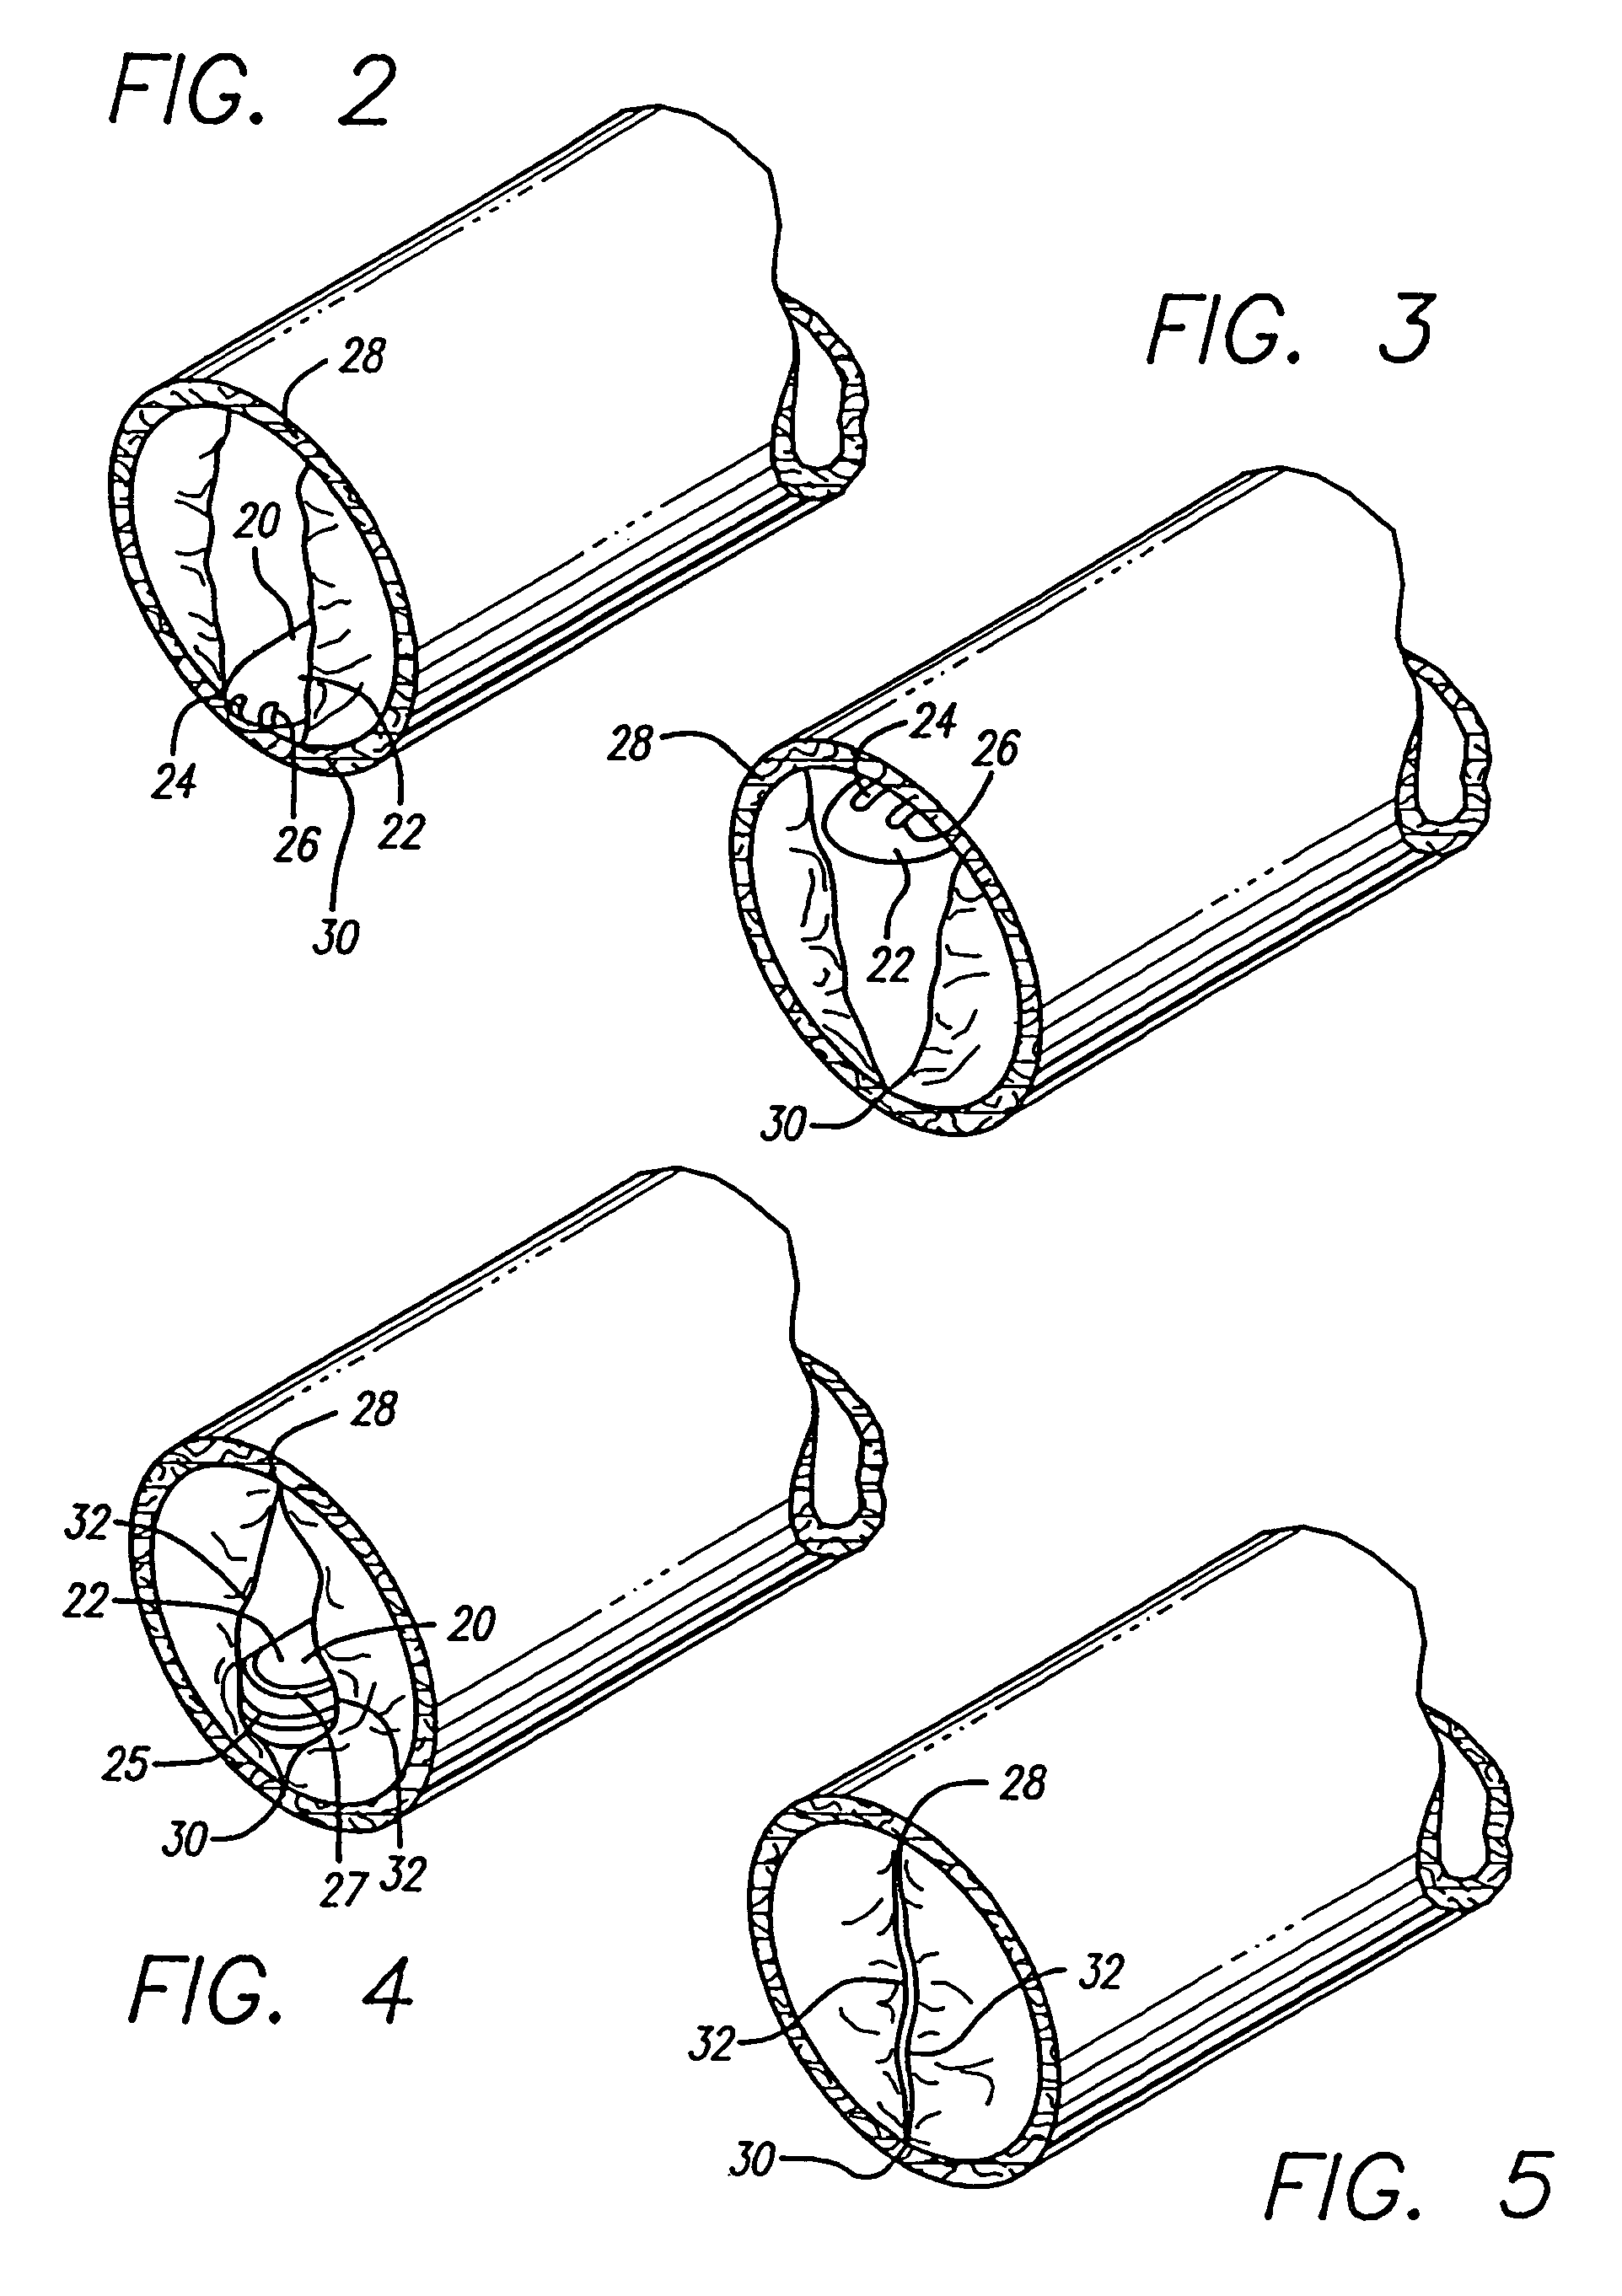 Method and apparatus for treating venous insufficiency using directionally applied energy